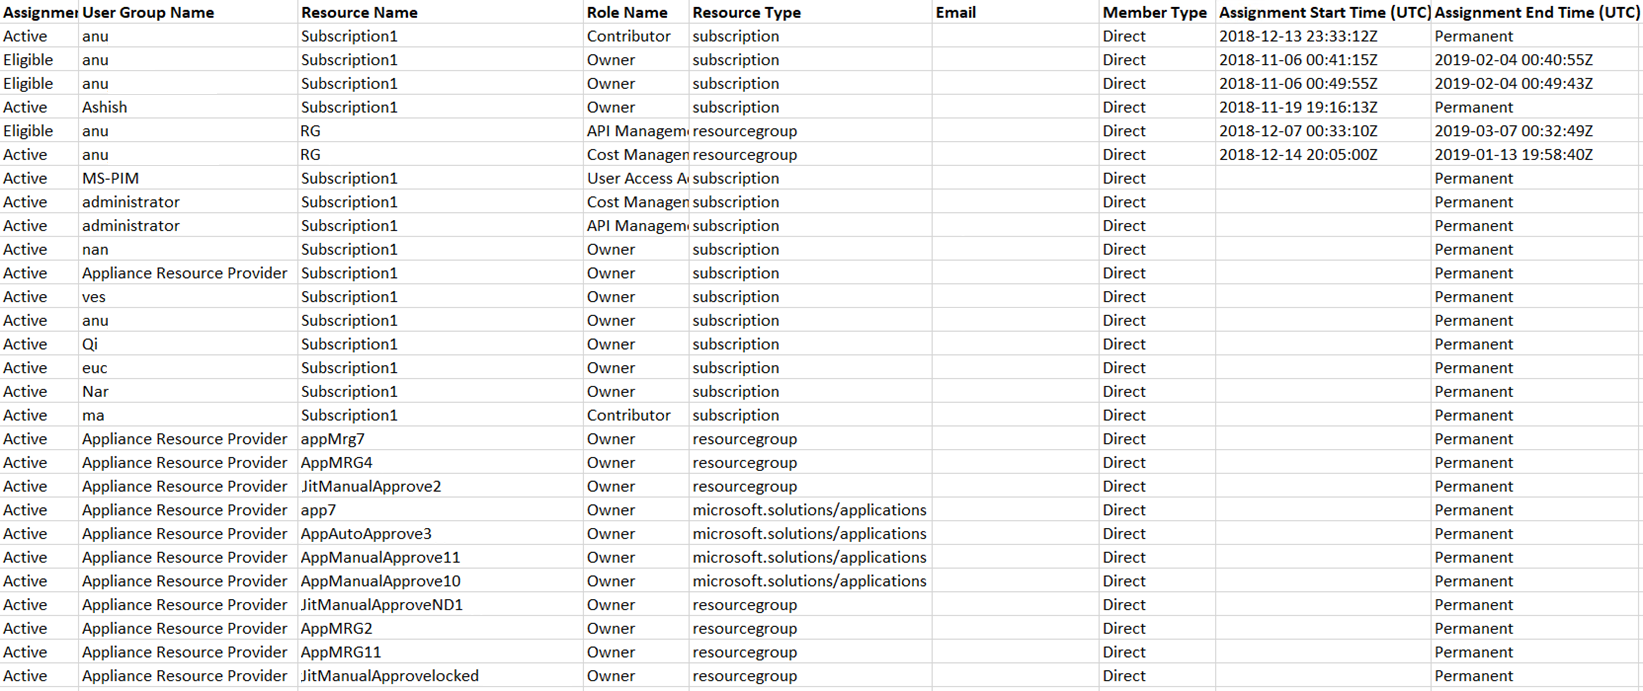 Screenshot of a csv file showing all role assignments that were exported.